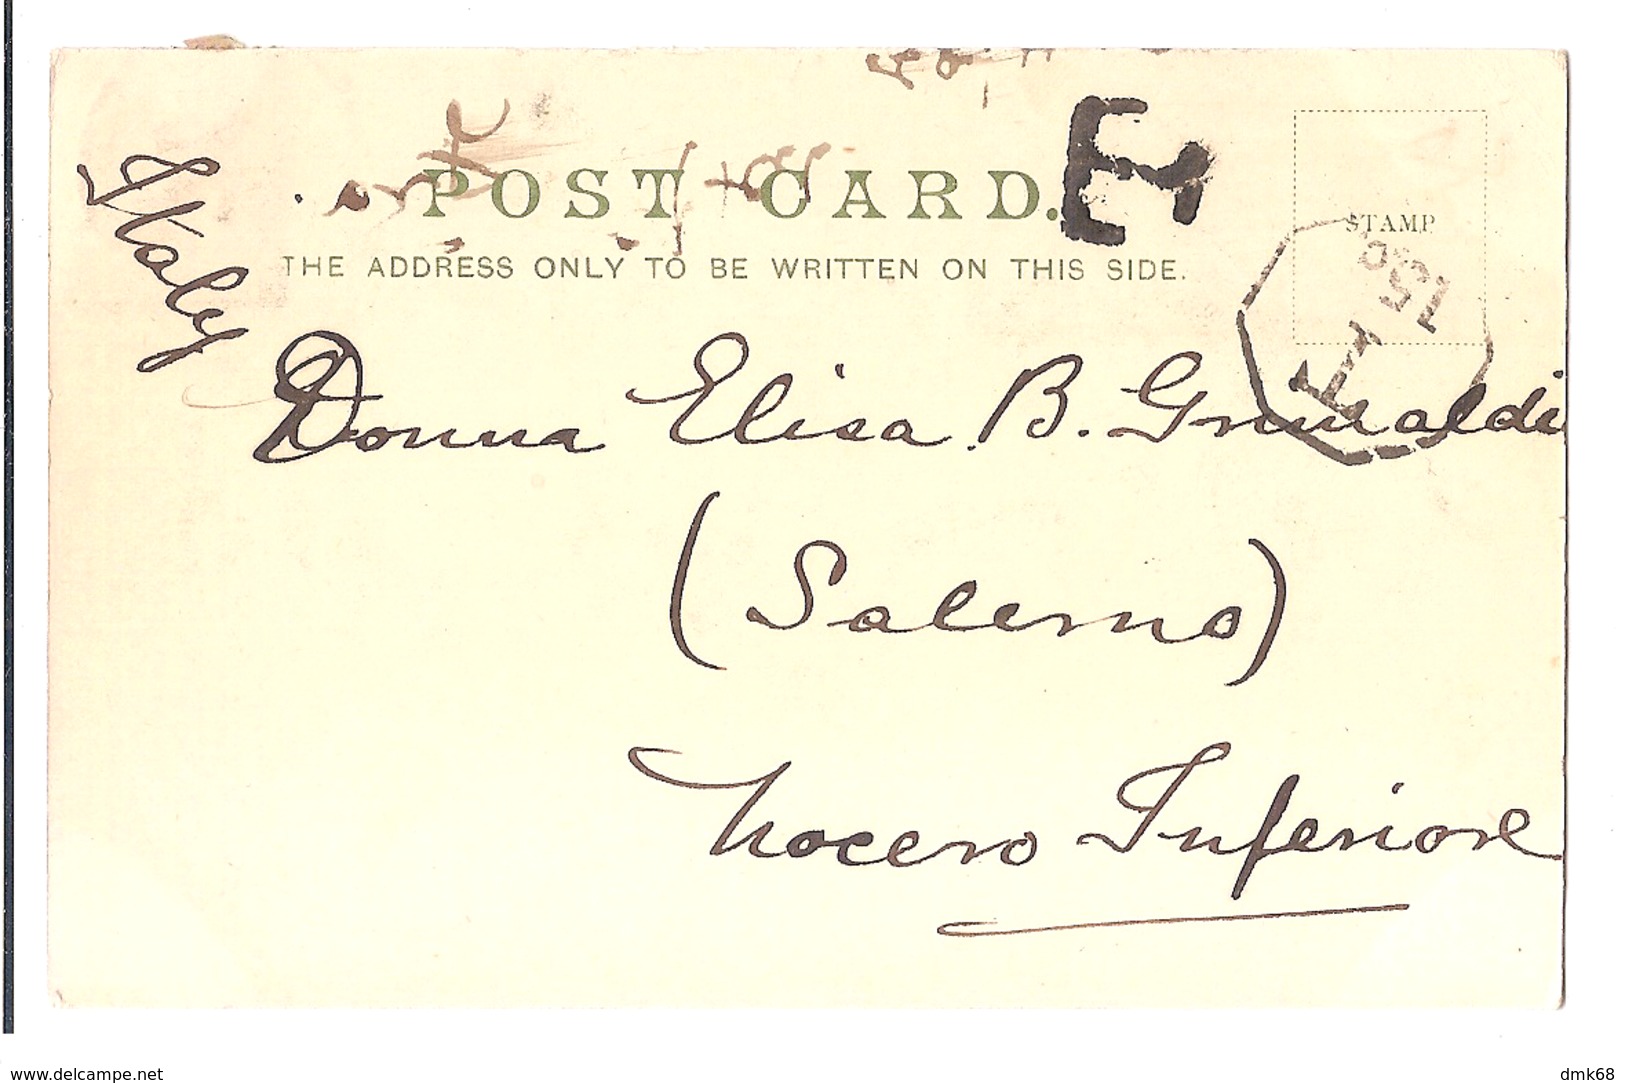 SOUTH AFRICA - EAST LONDON - NAHOON POINT - STAMP - MAILED TO ITALY 1902 - ( 2784) - Afrique Du Sud